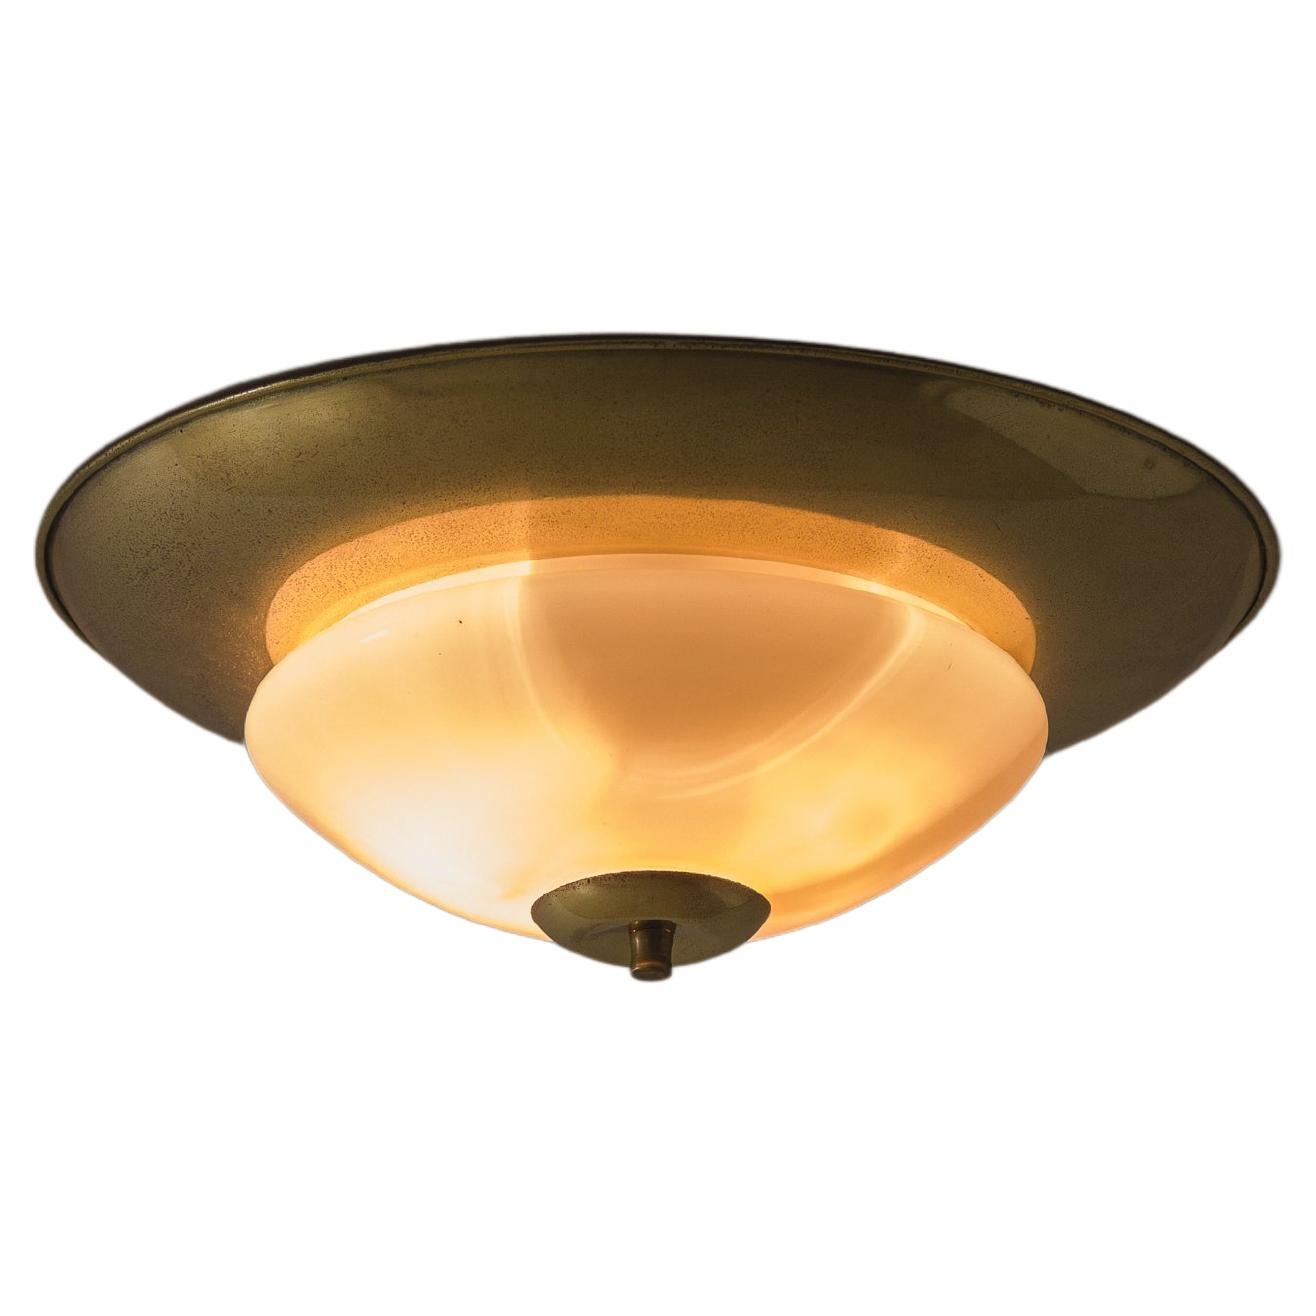 Vintage Midcentury Ceiling Lamp, Brass and Opaline Glass, Brazilian Design, 1960 For Sale